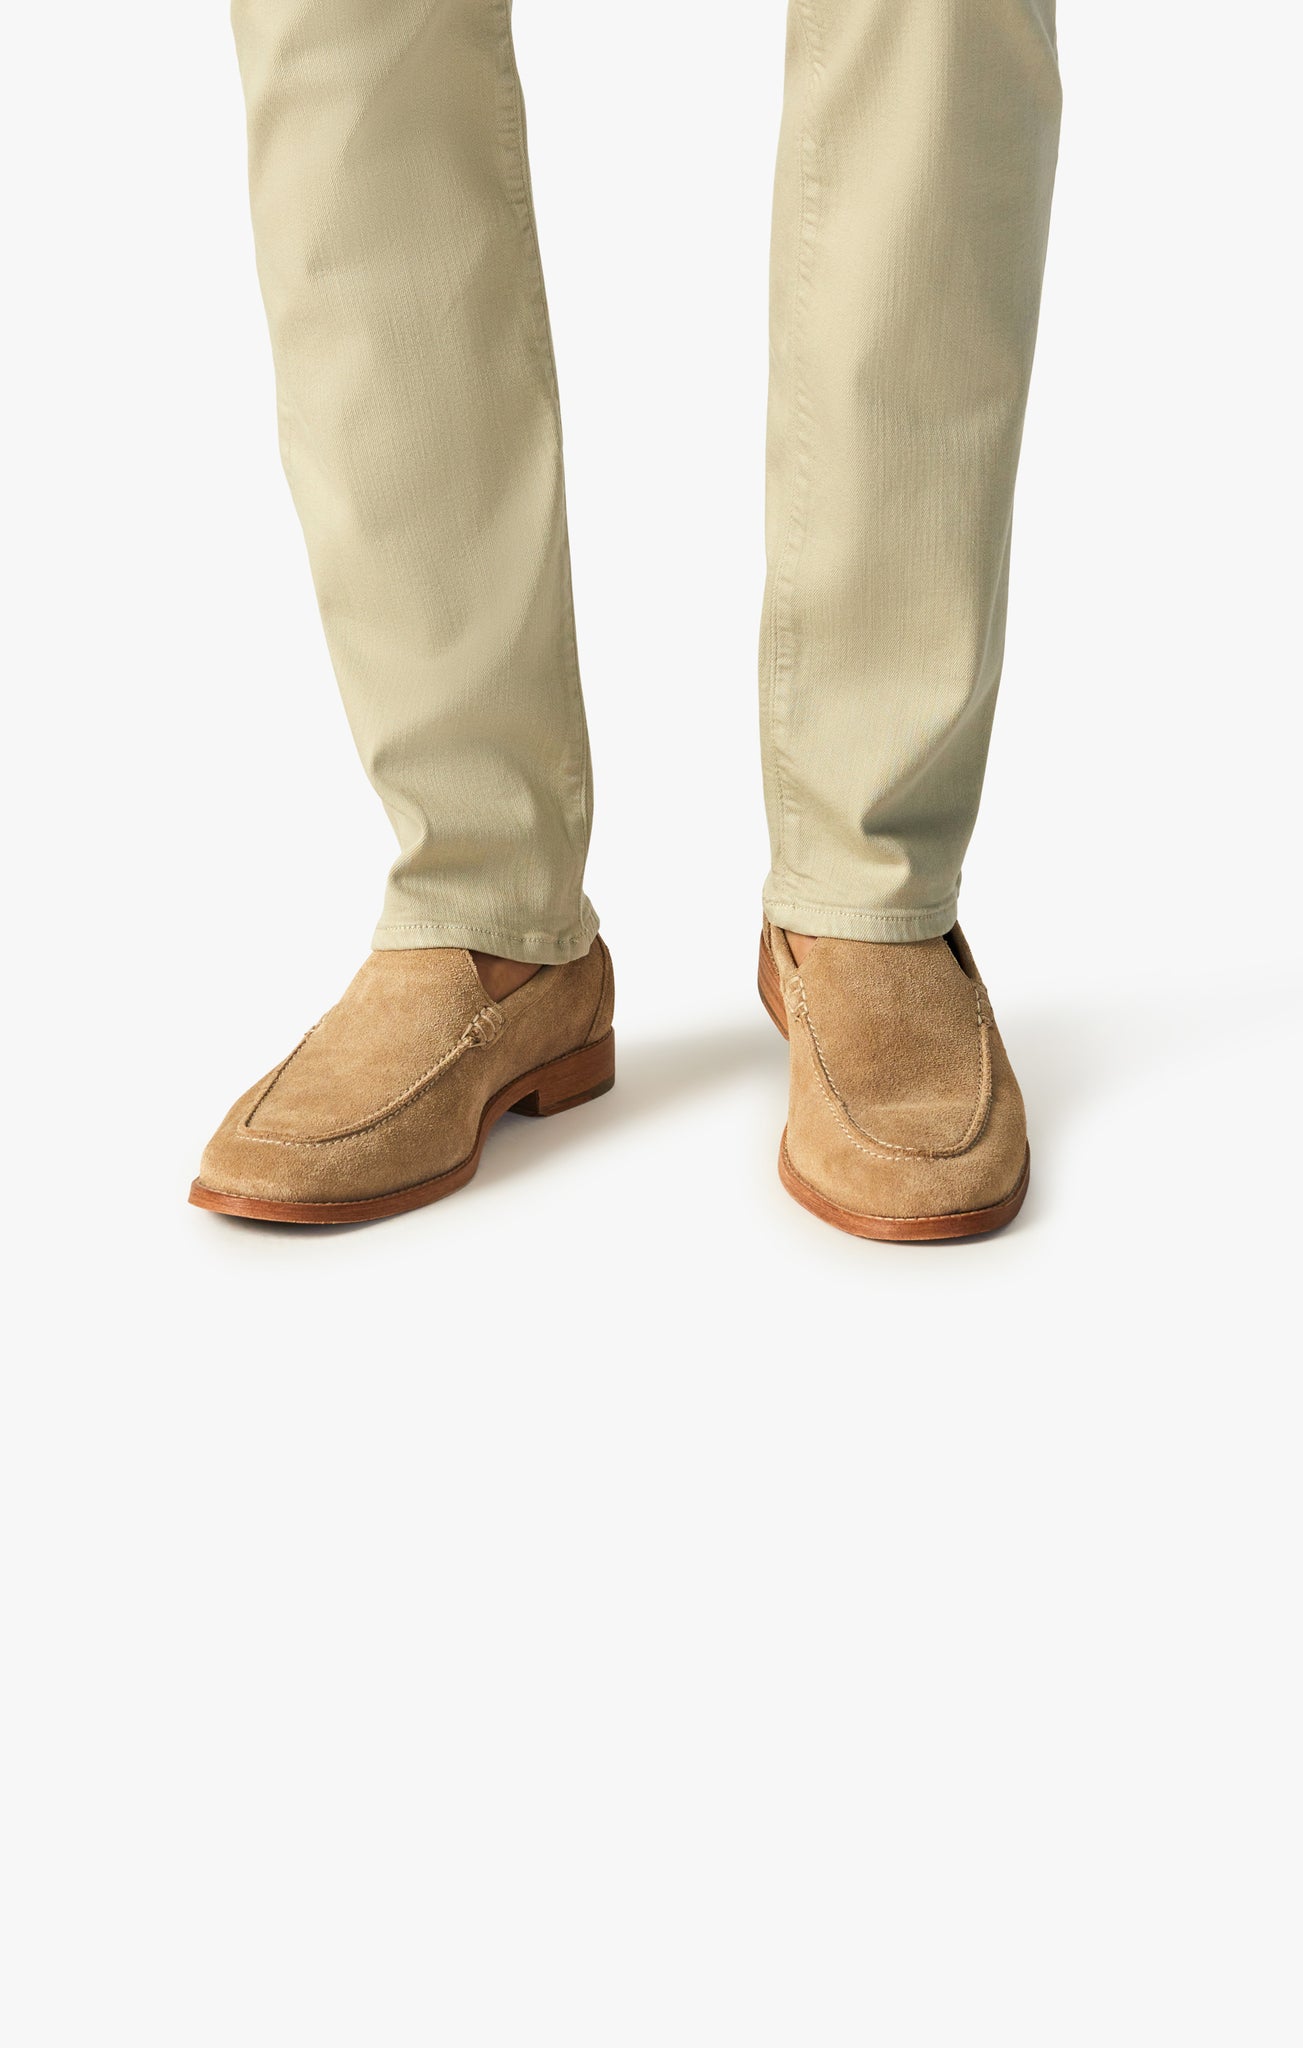 Cool Tapered Leg Pants In Moss Comfort